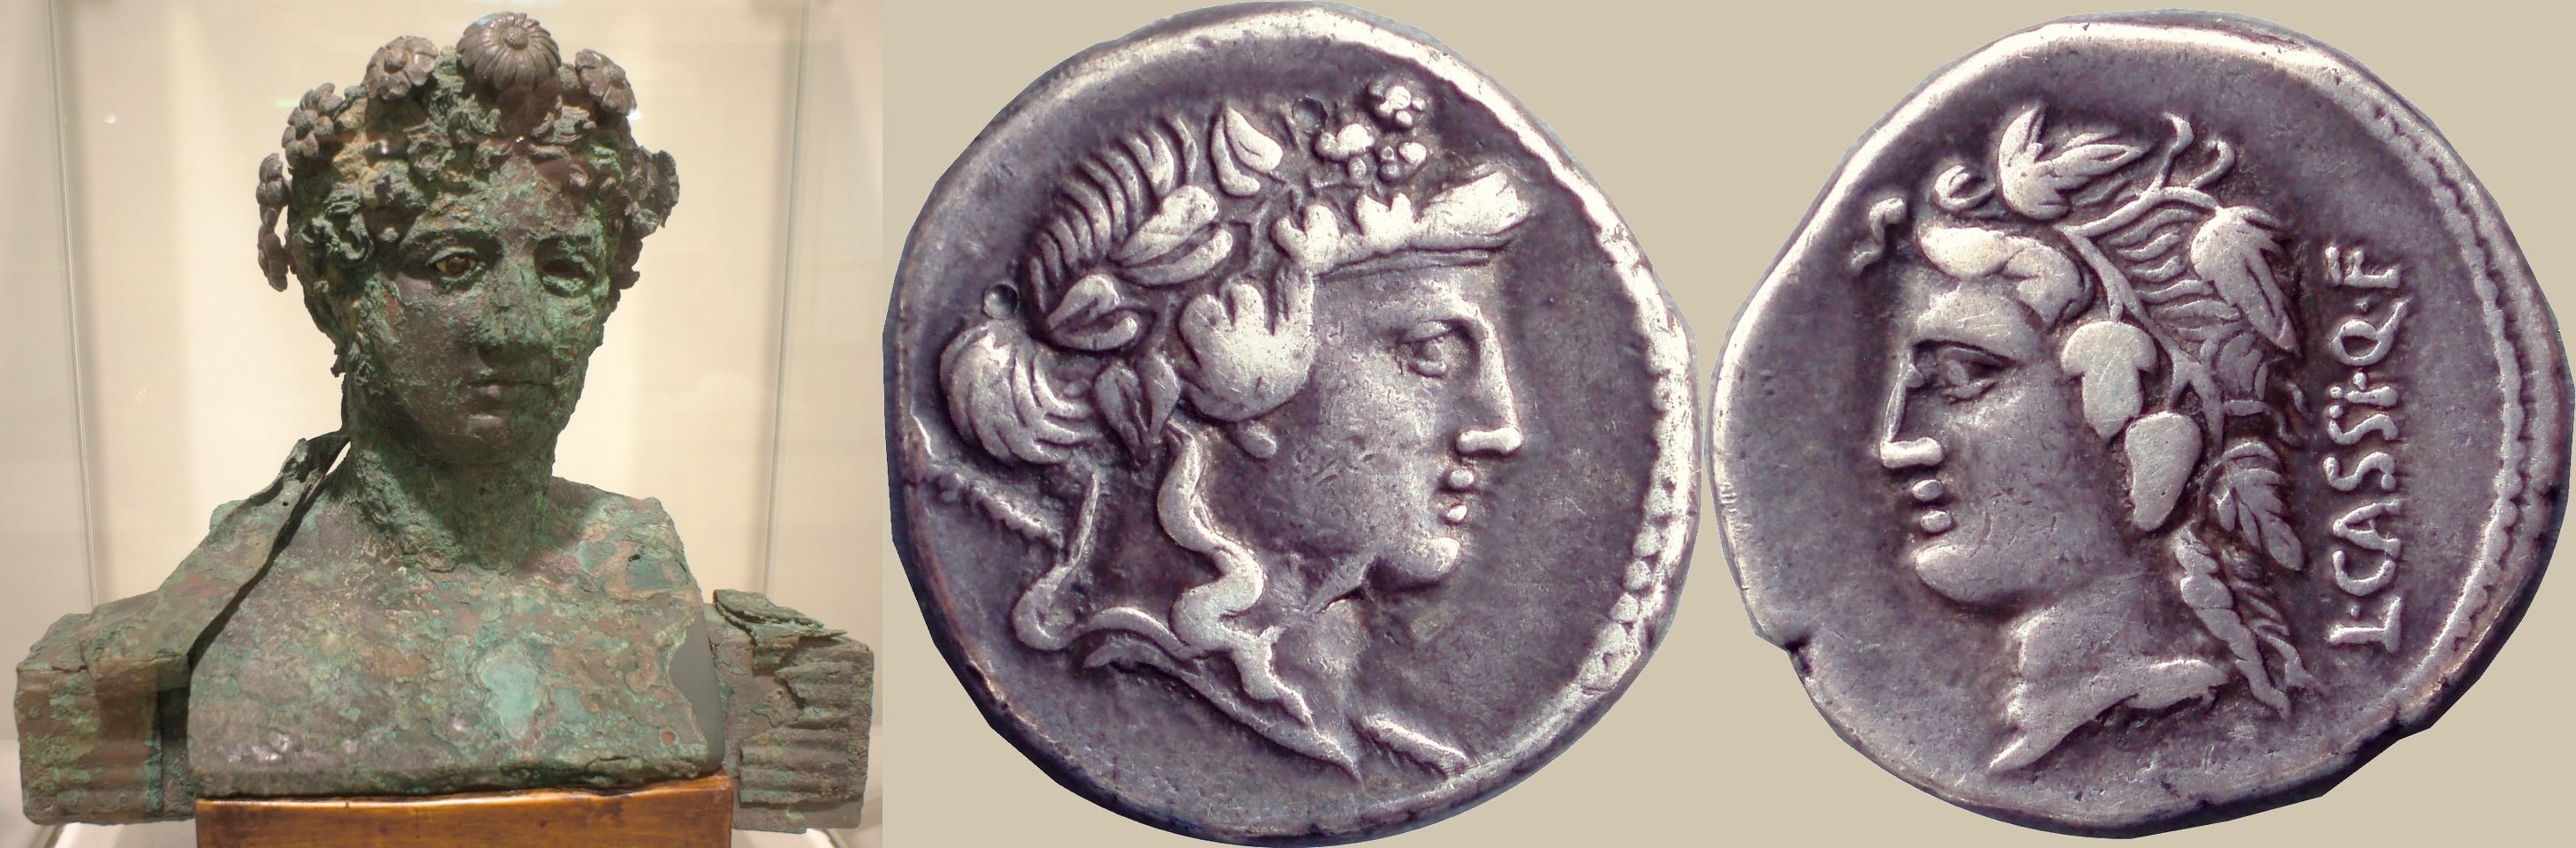 386/1 coin of Lucius Cassius with Bacchus and Libera 78BC, with terminal bust of Bacchus from a vineyard estate in Boscoreale near Pompeii